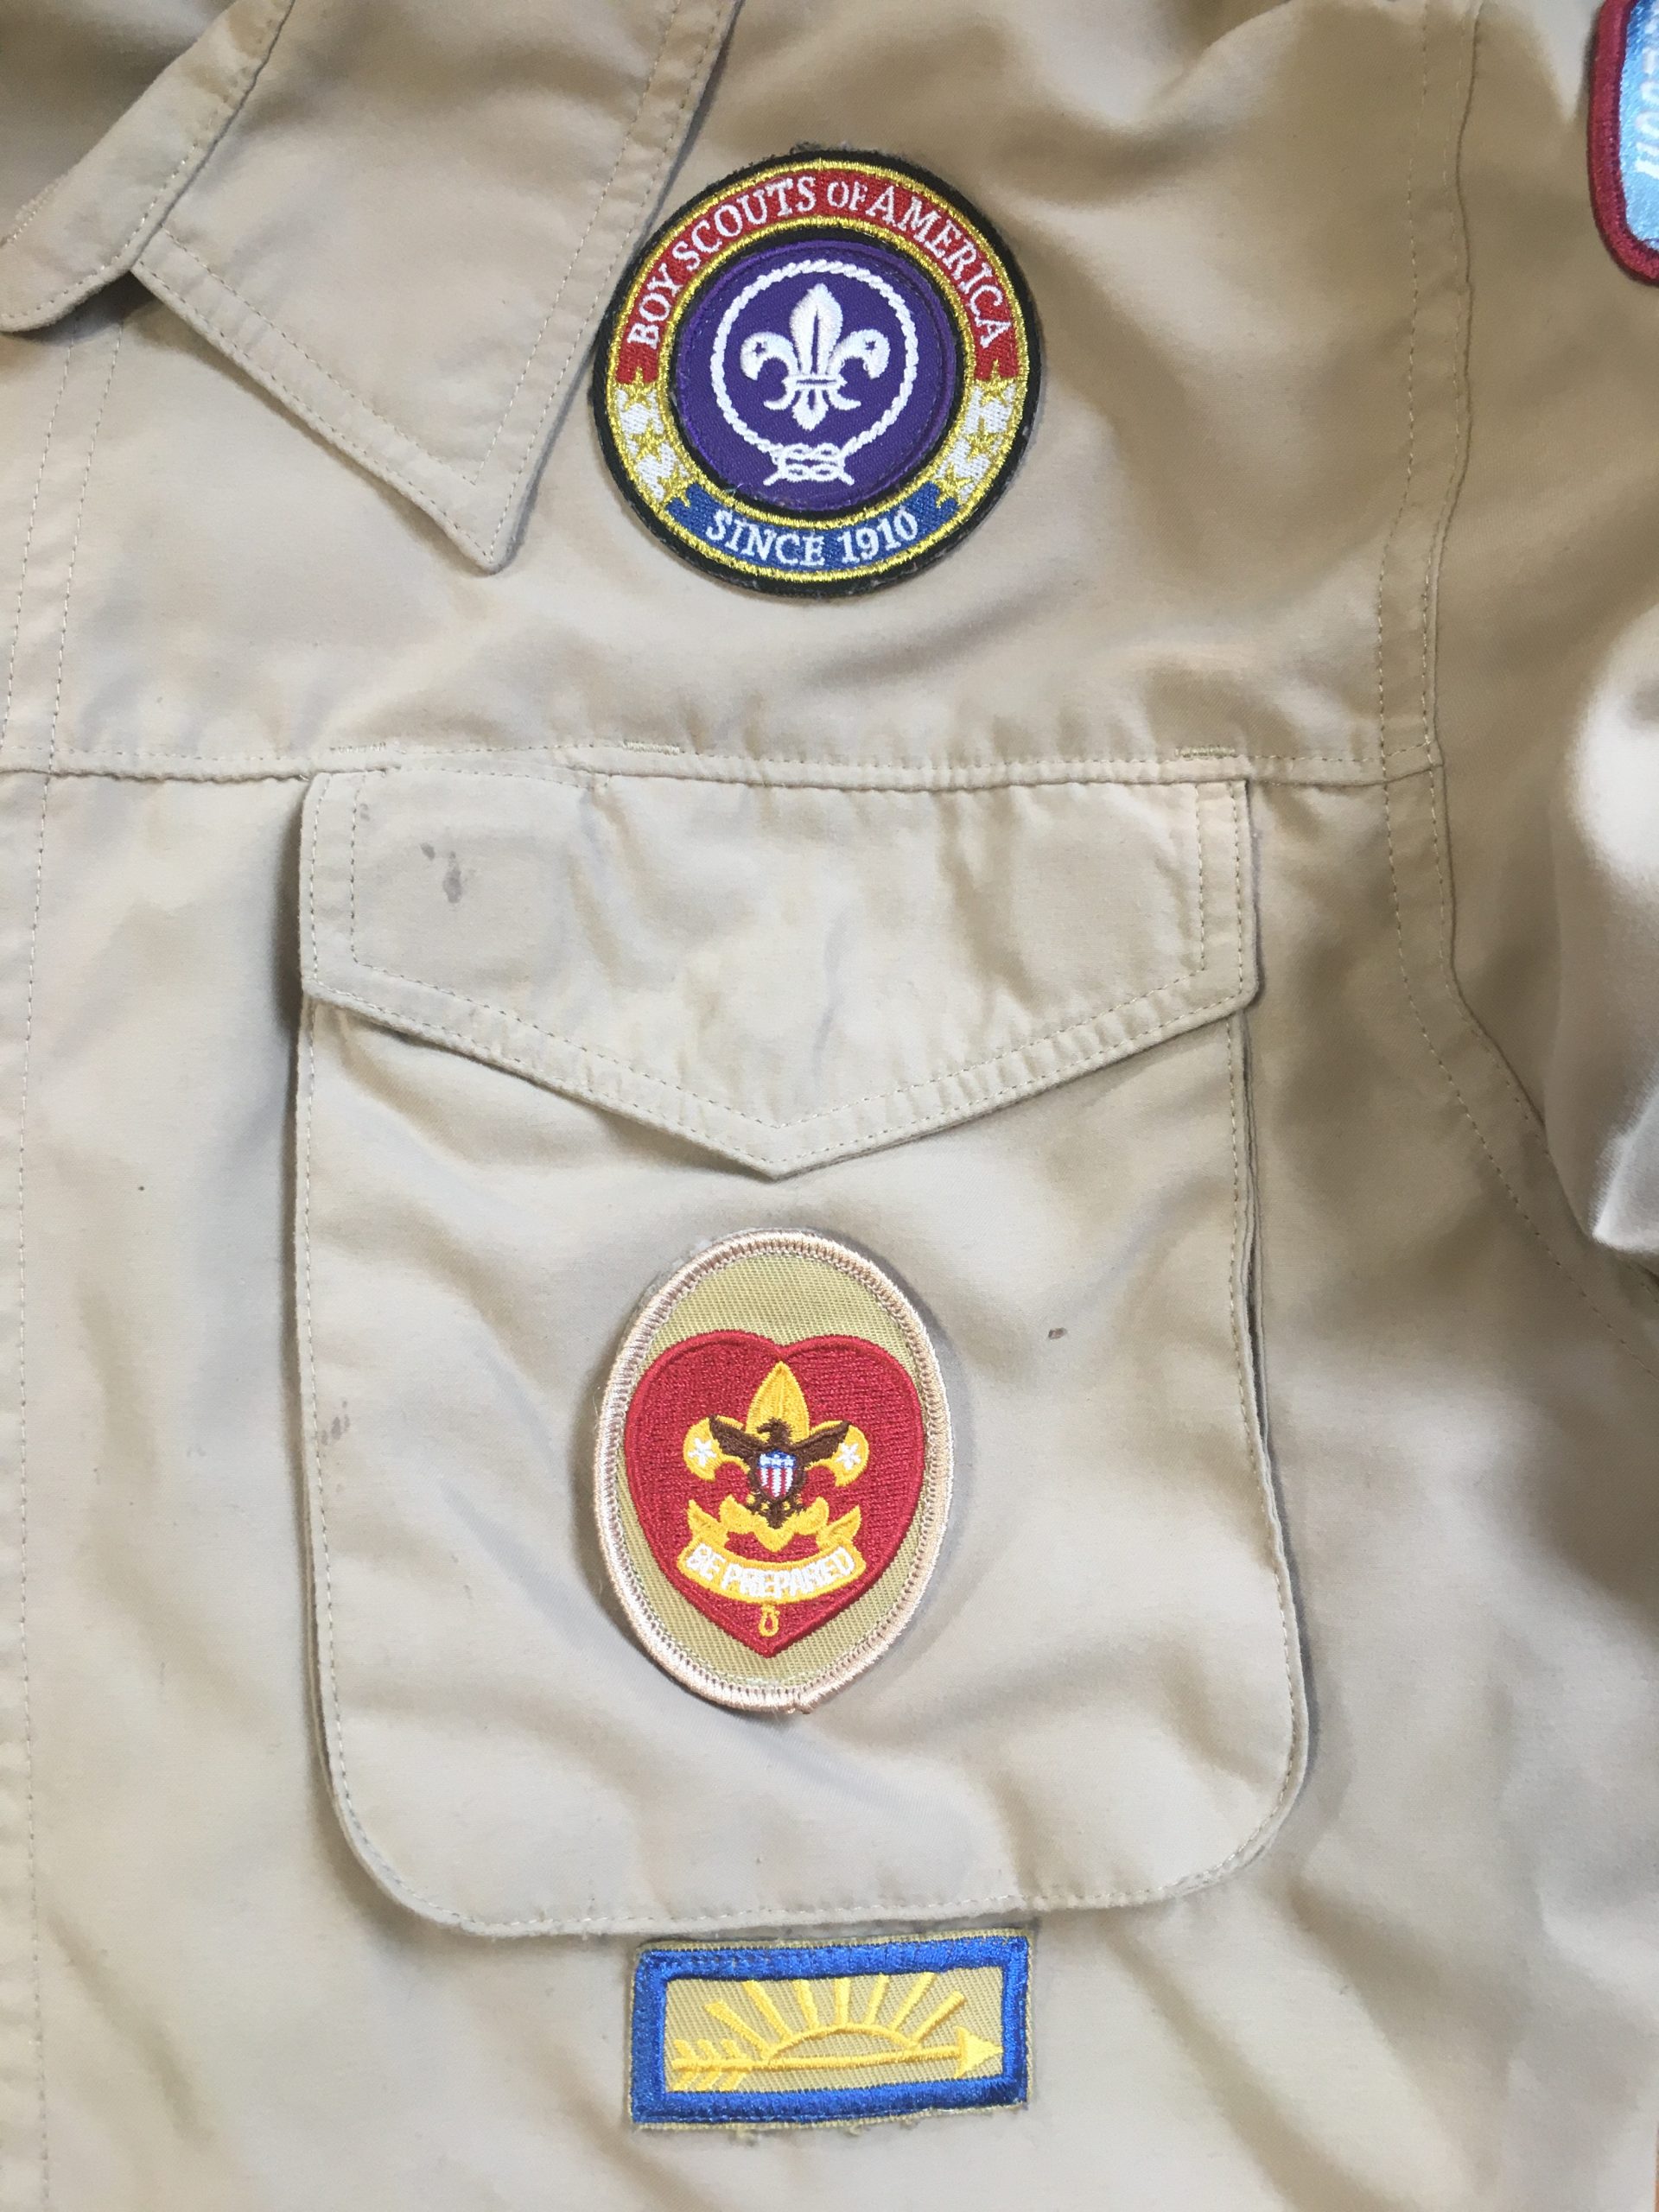 Details on Scouts BSA uniform and handbook availability